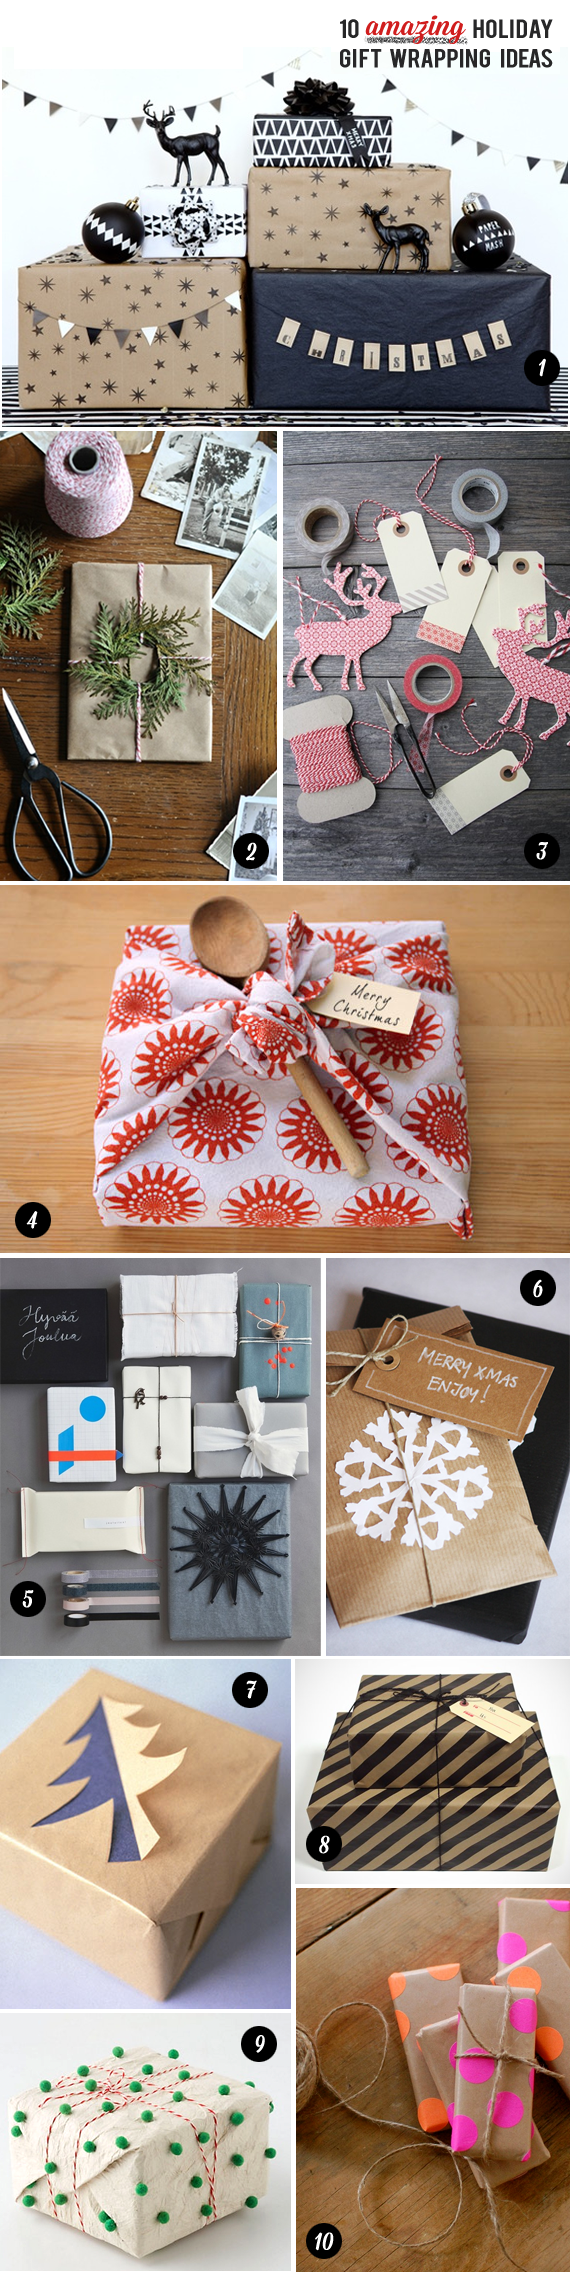 10 Amazing Holiday Gift Wrapping Ideas